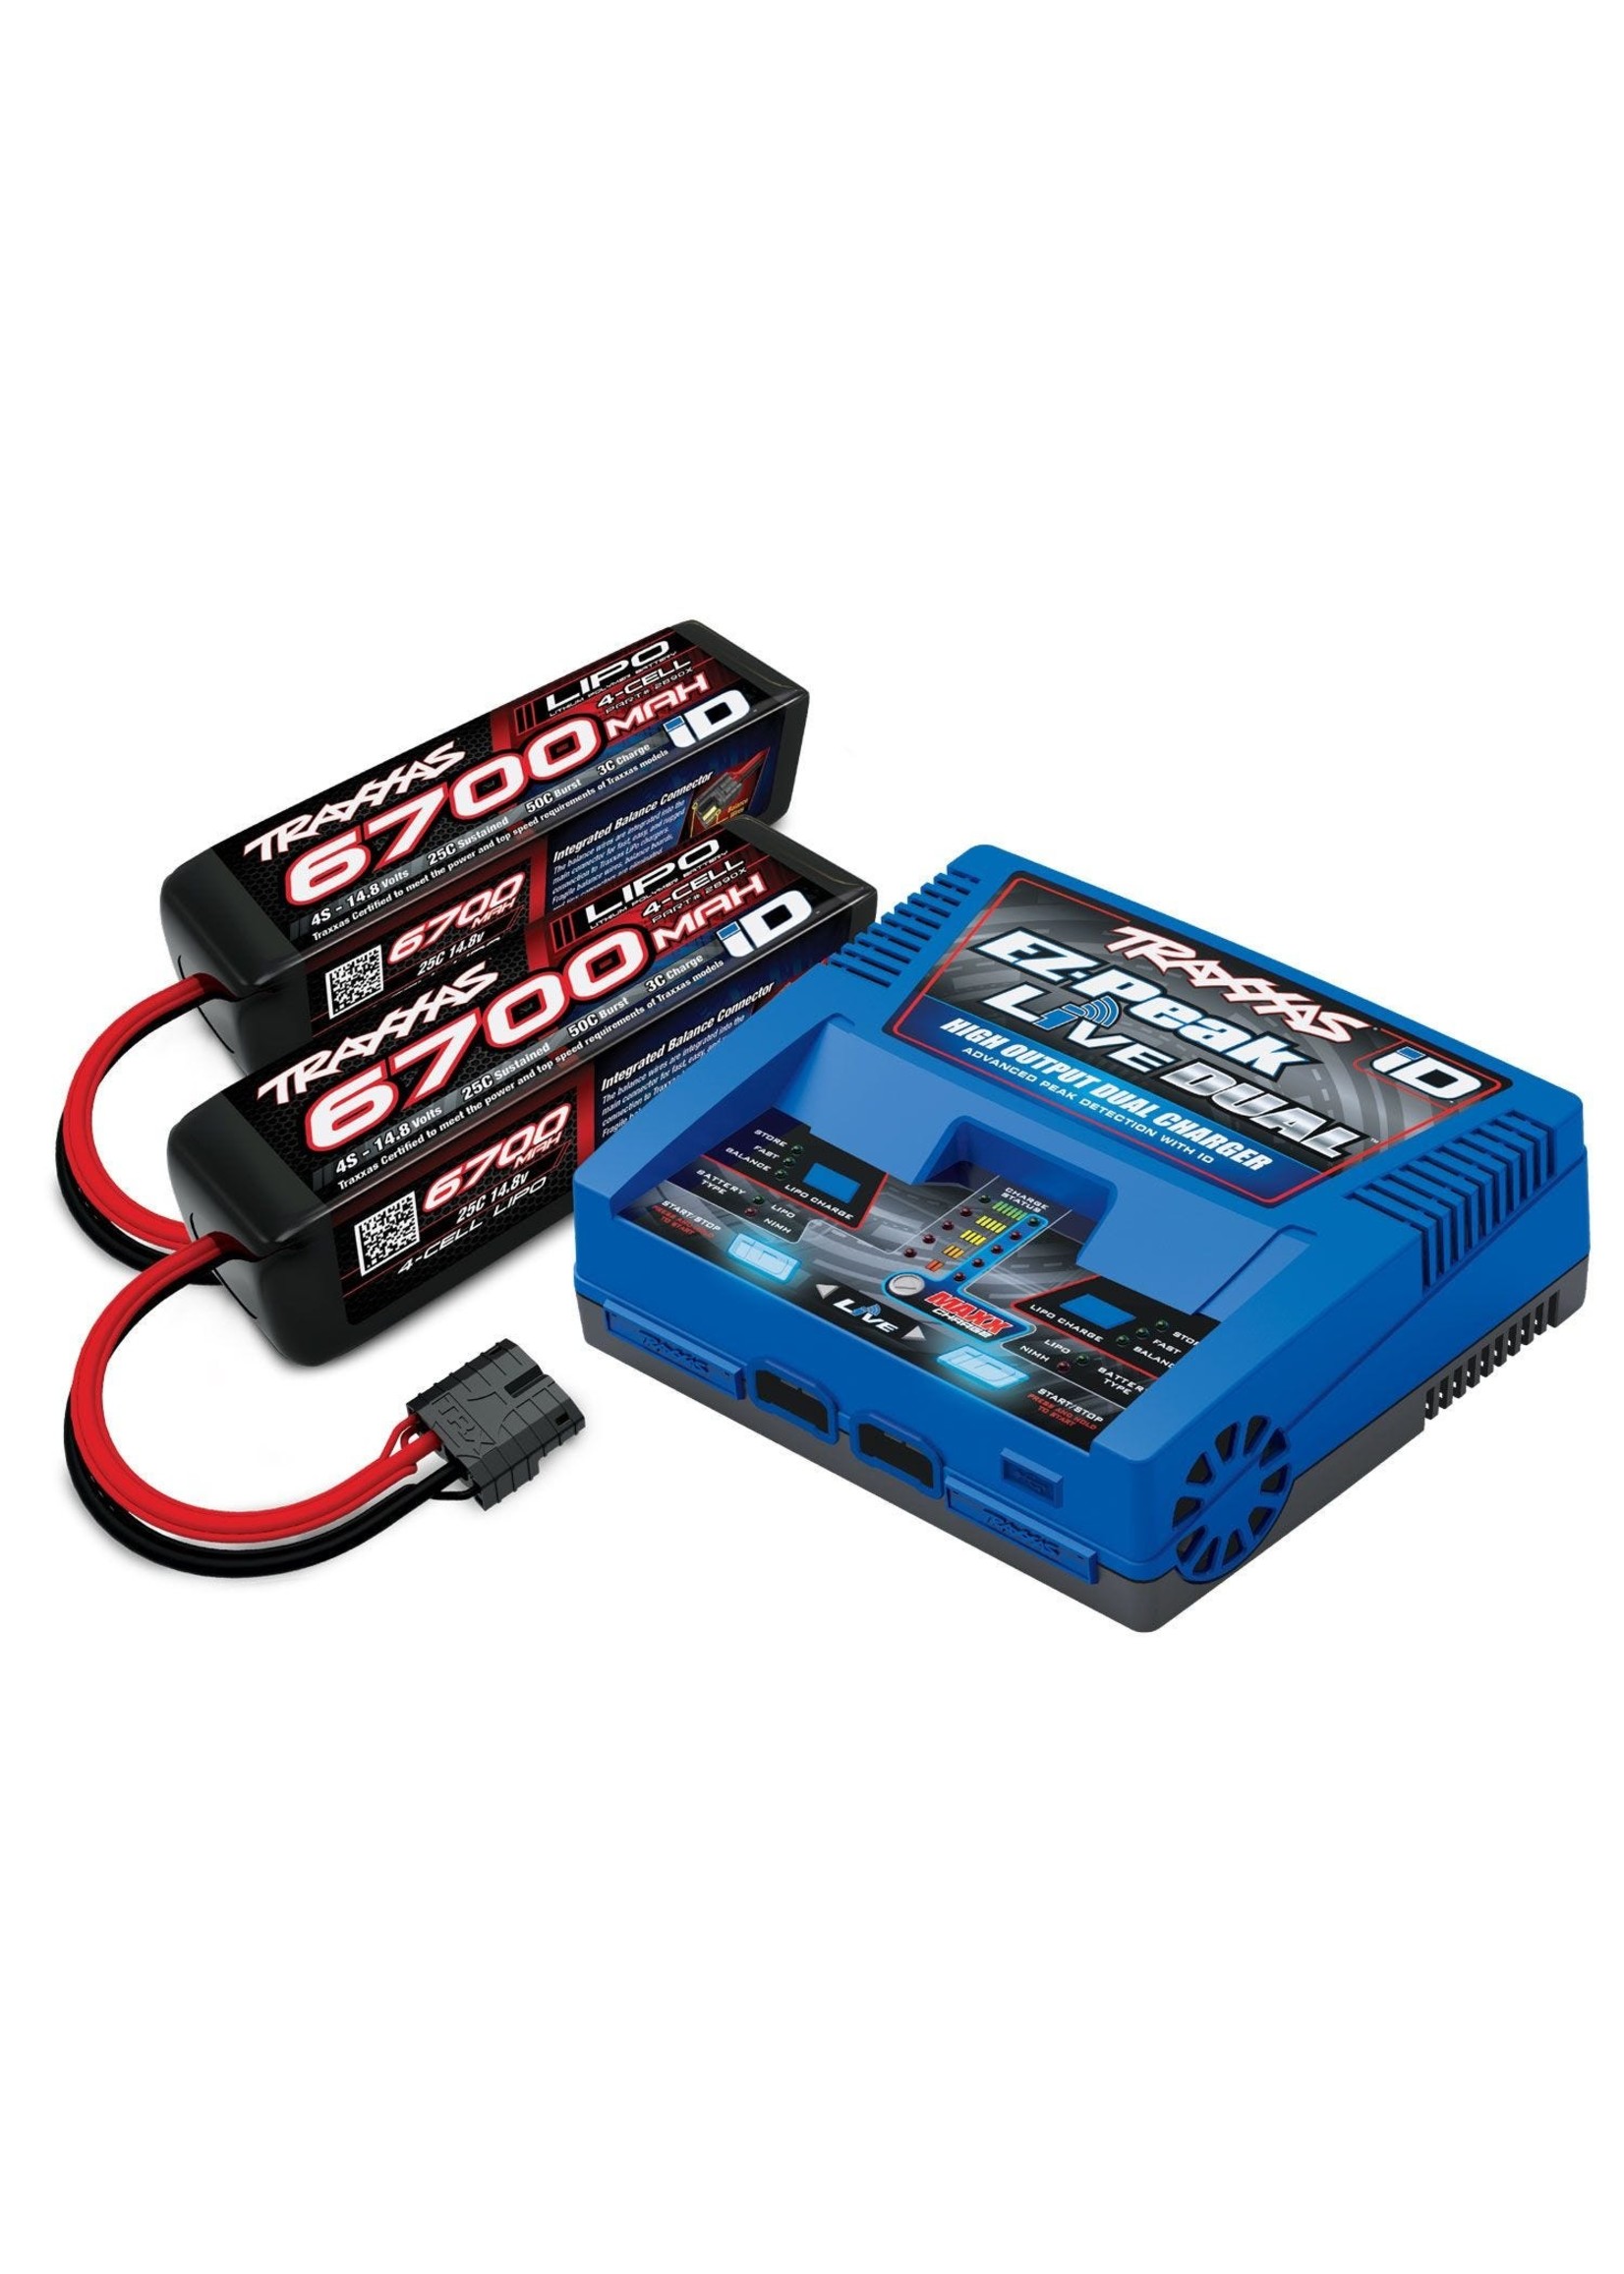 Traxxas TRA2997 Traxxas Battery/charger completer pack (includes #2973 Dual iD charger (1), #2890X 6700mAh 14.8V 4-cell 25C LiPo battery (2))